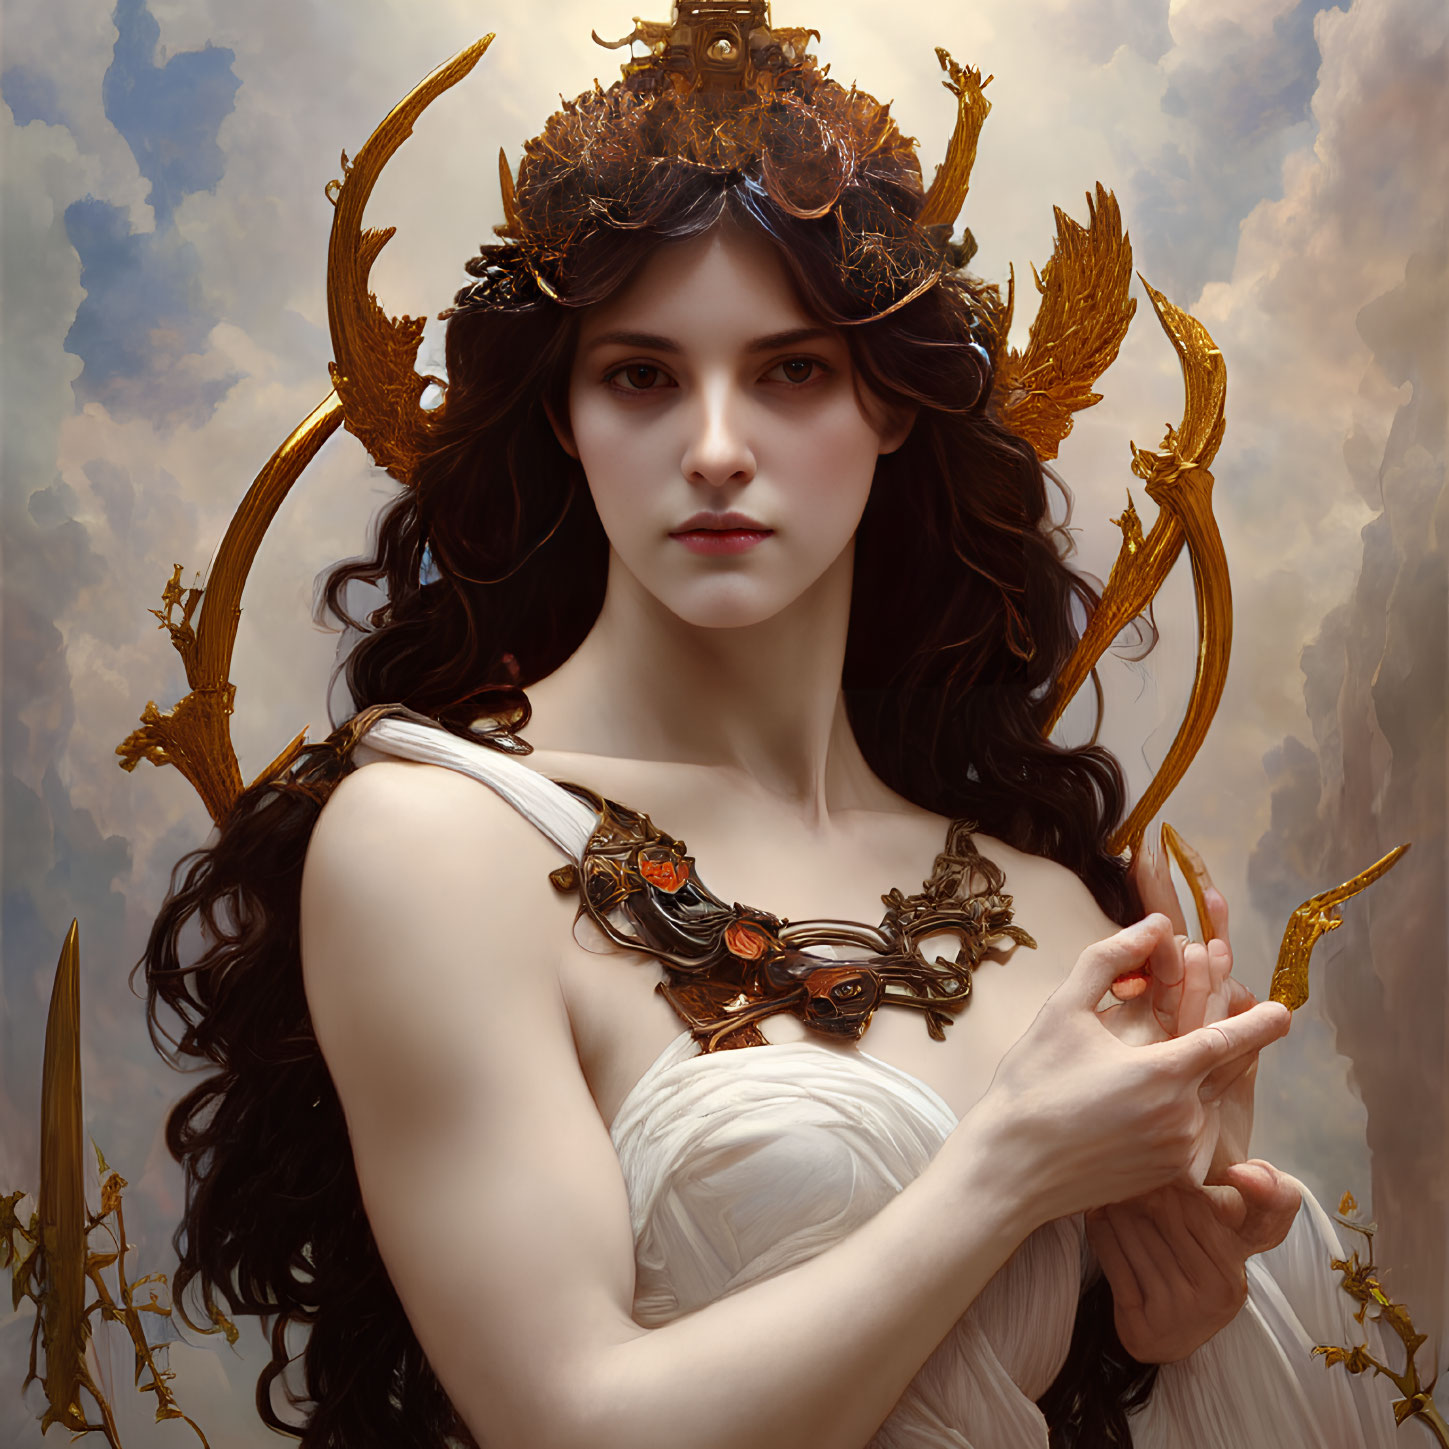 Ethereal woman in white gown with gold antler crown